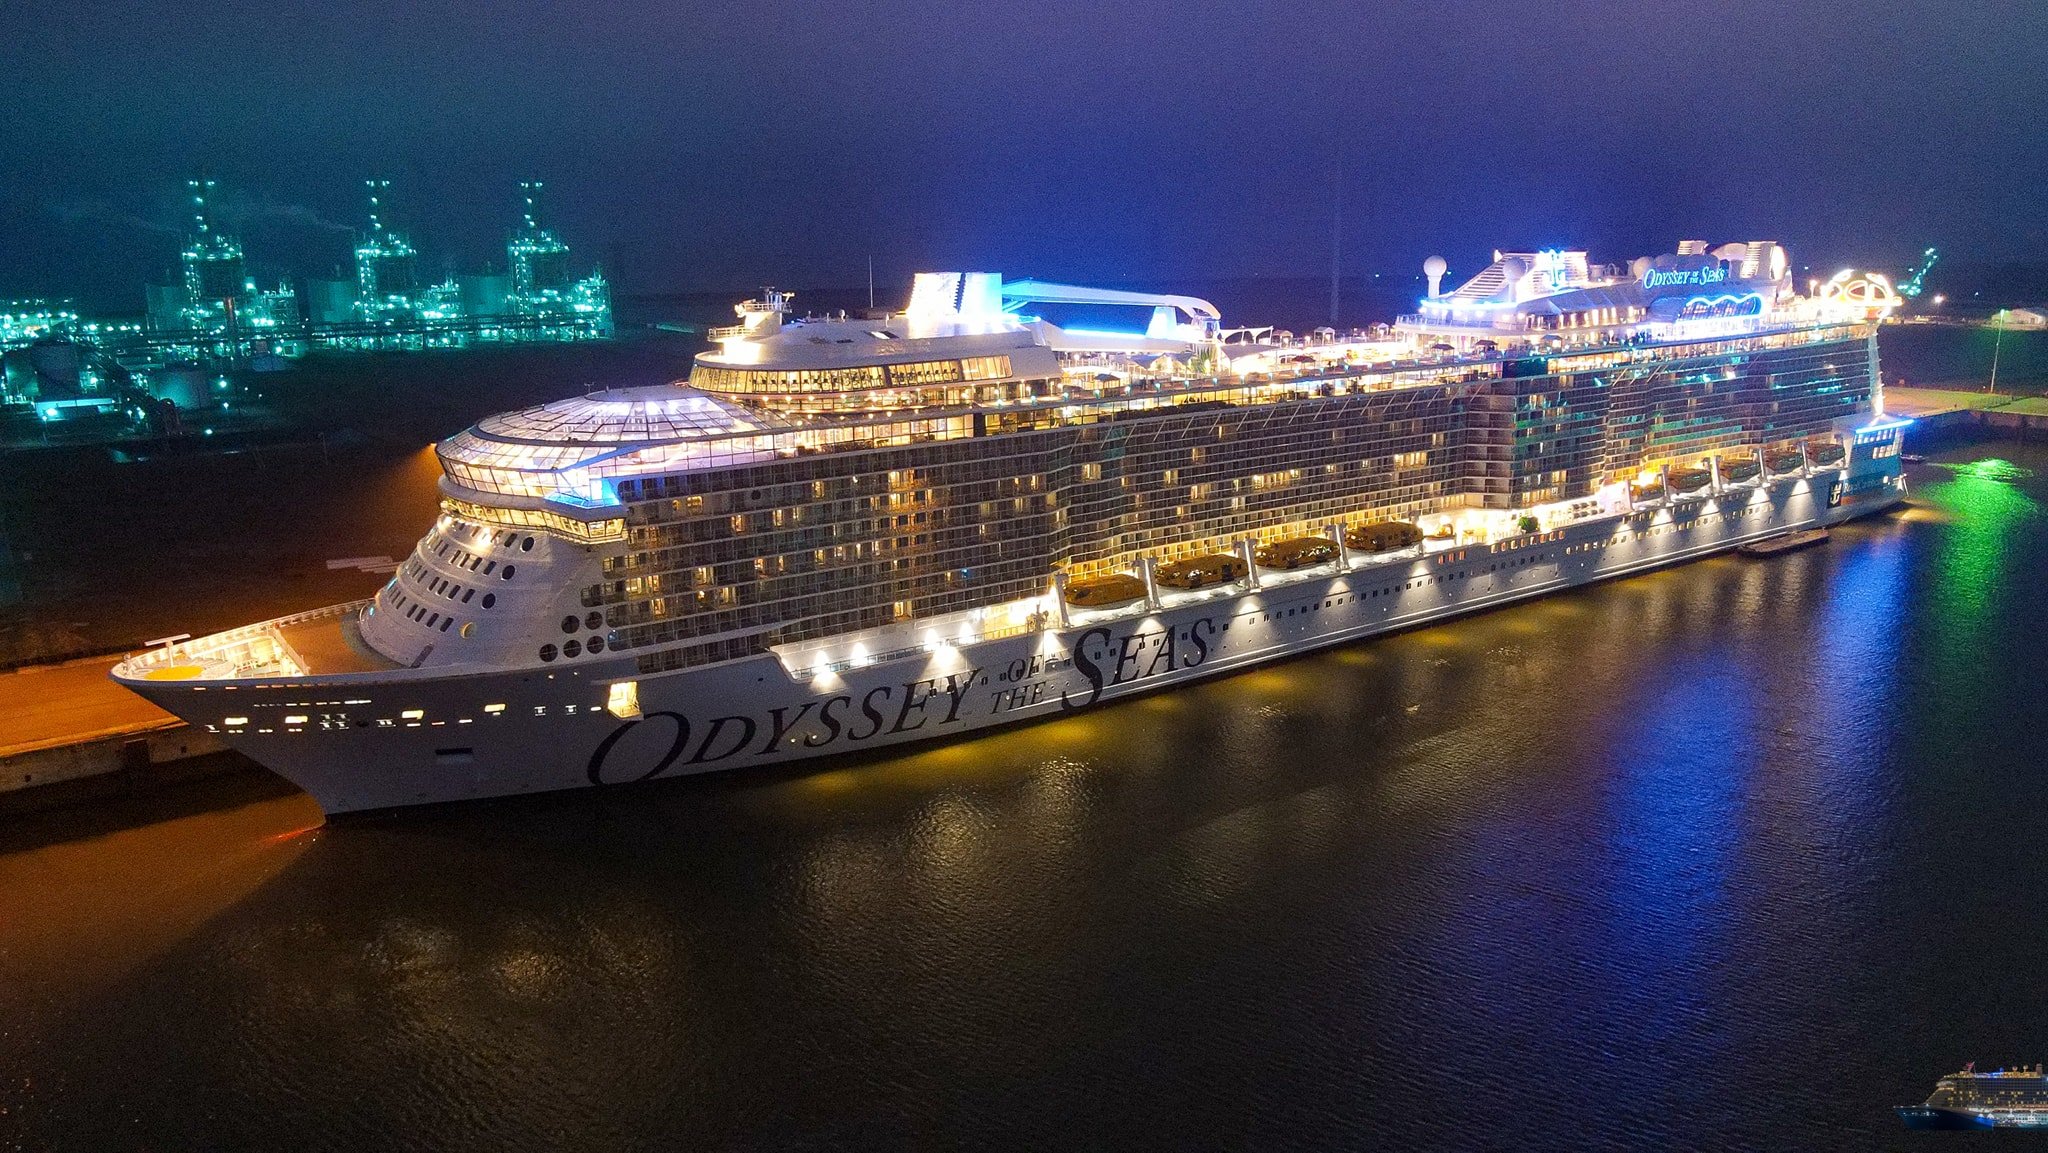 Odyssey of the Seas completes journey to the sea | Royal Caribbean Blog